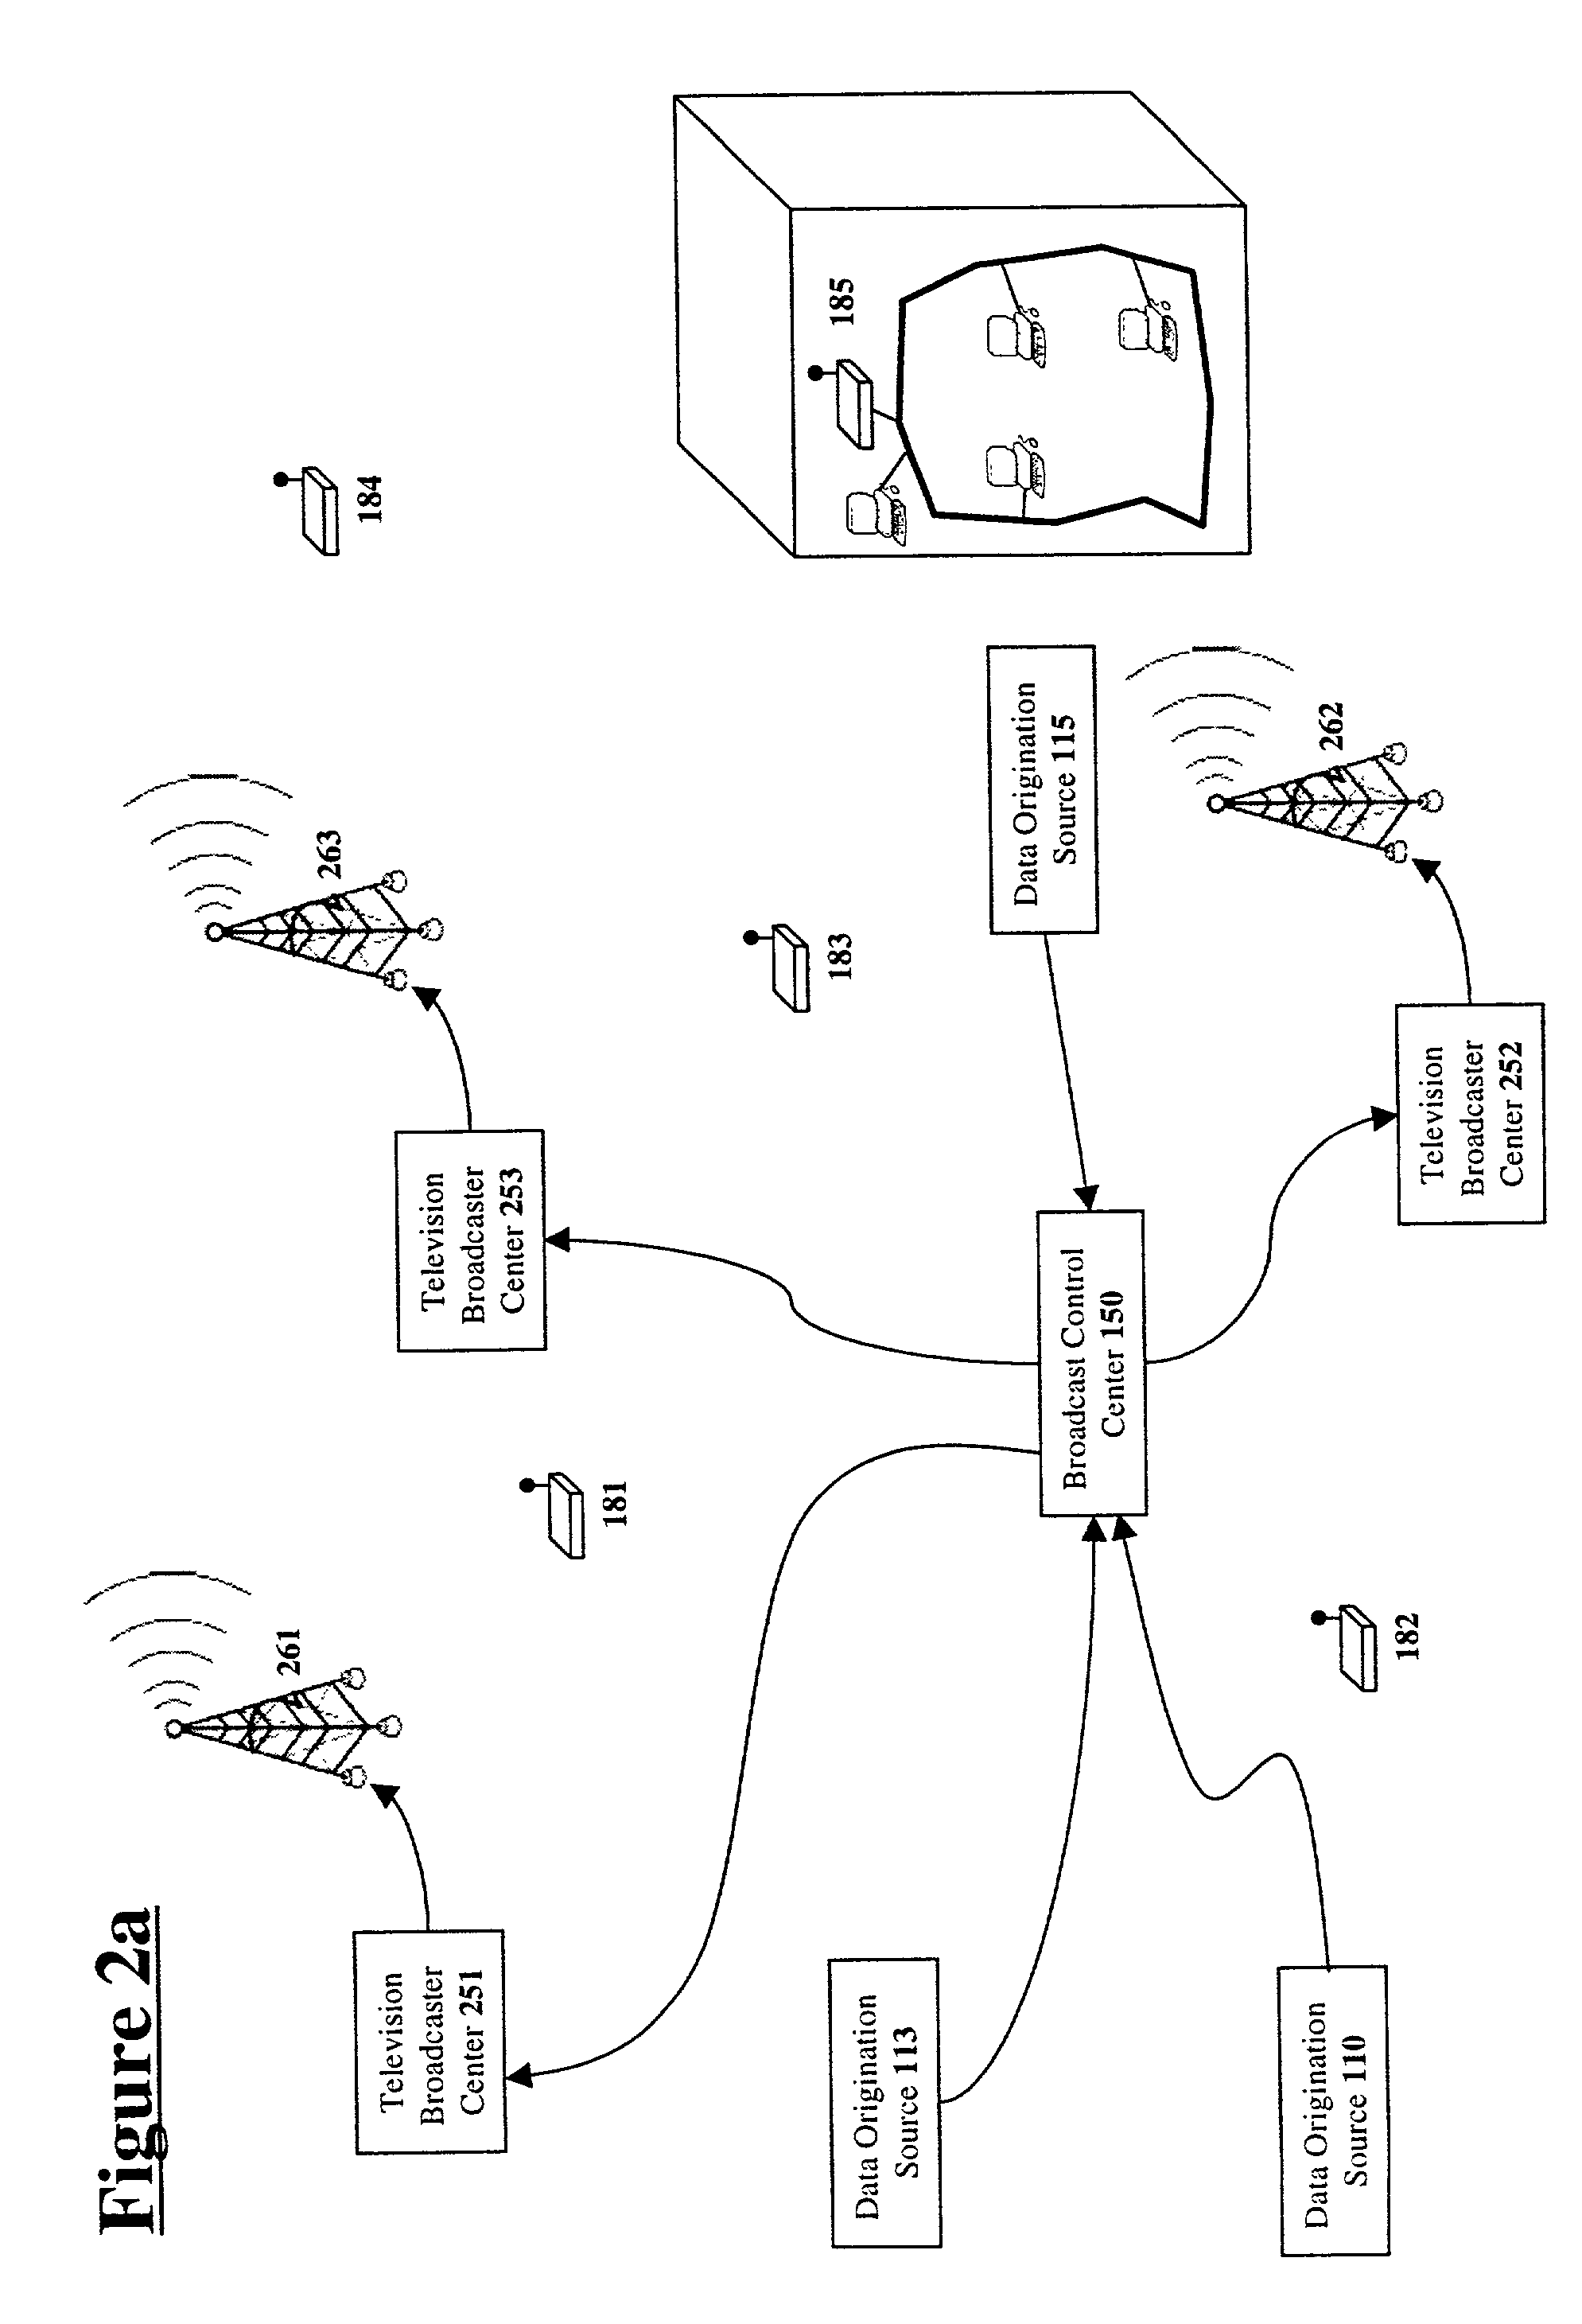 Methods of operating a data broadcast service